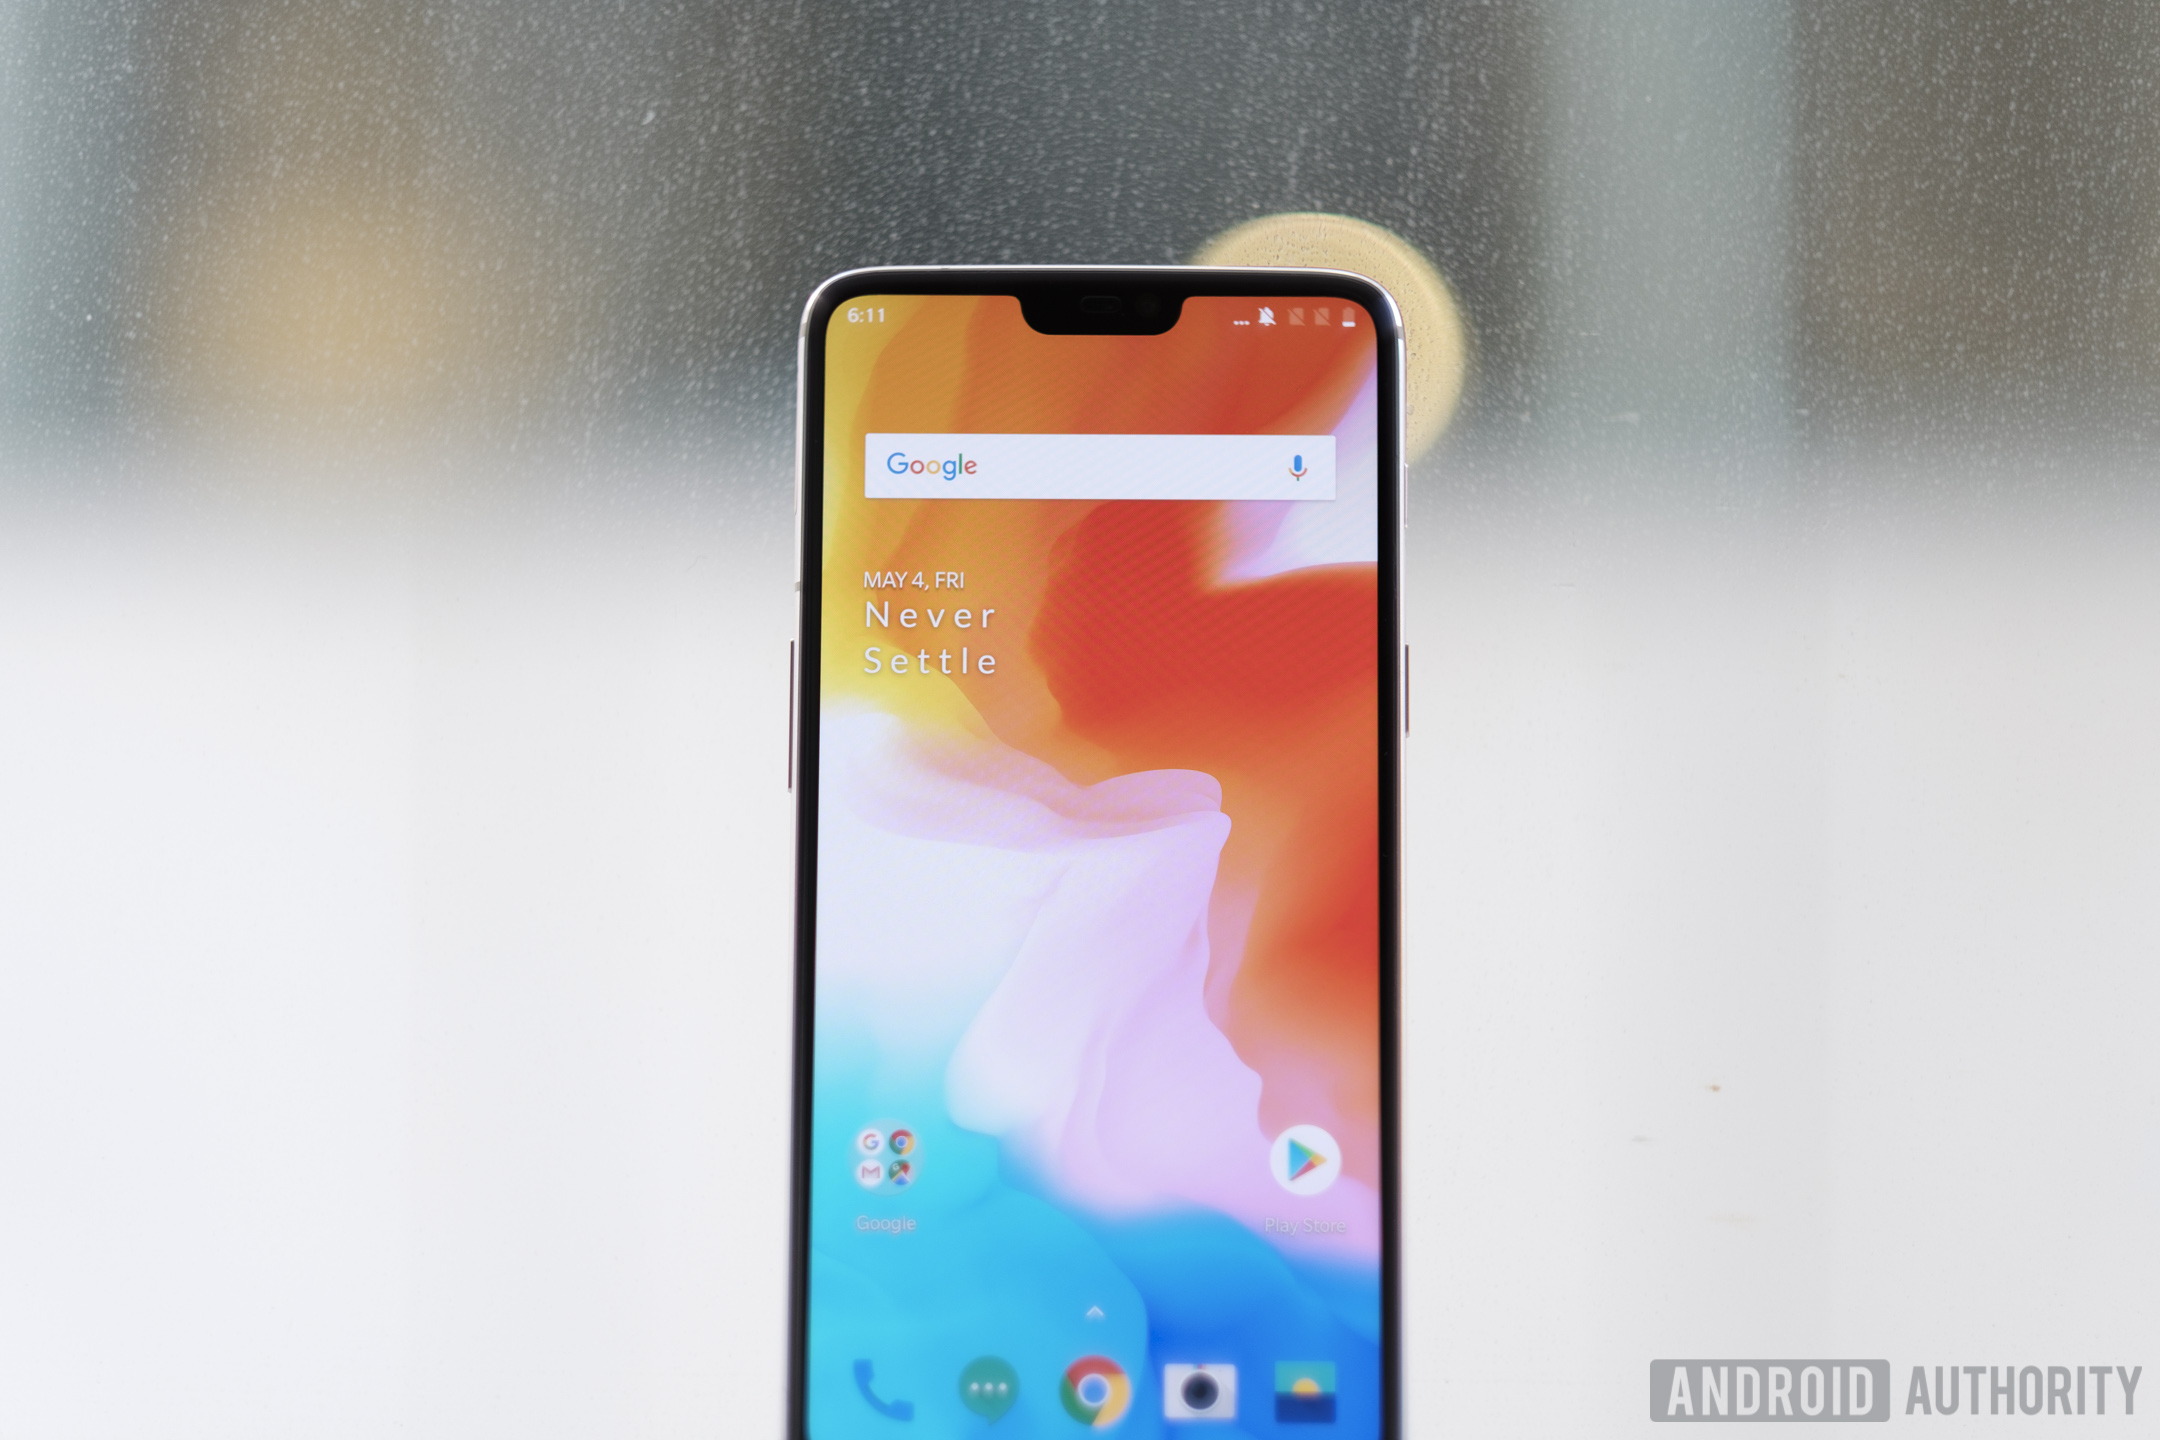 OnePlus 6 features